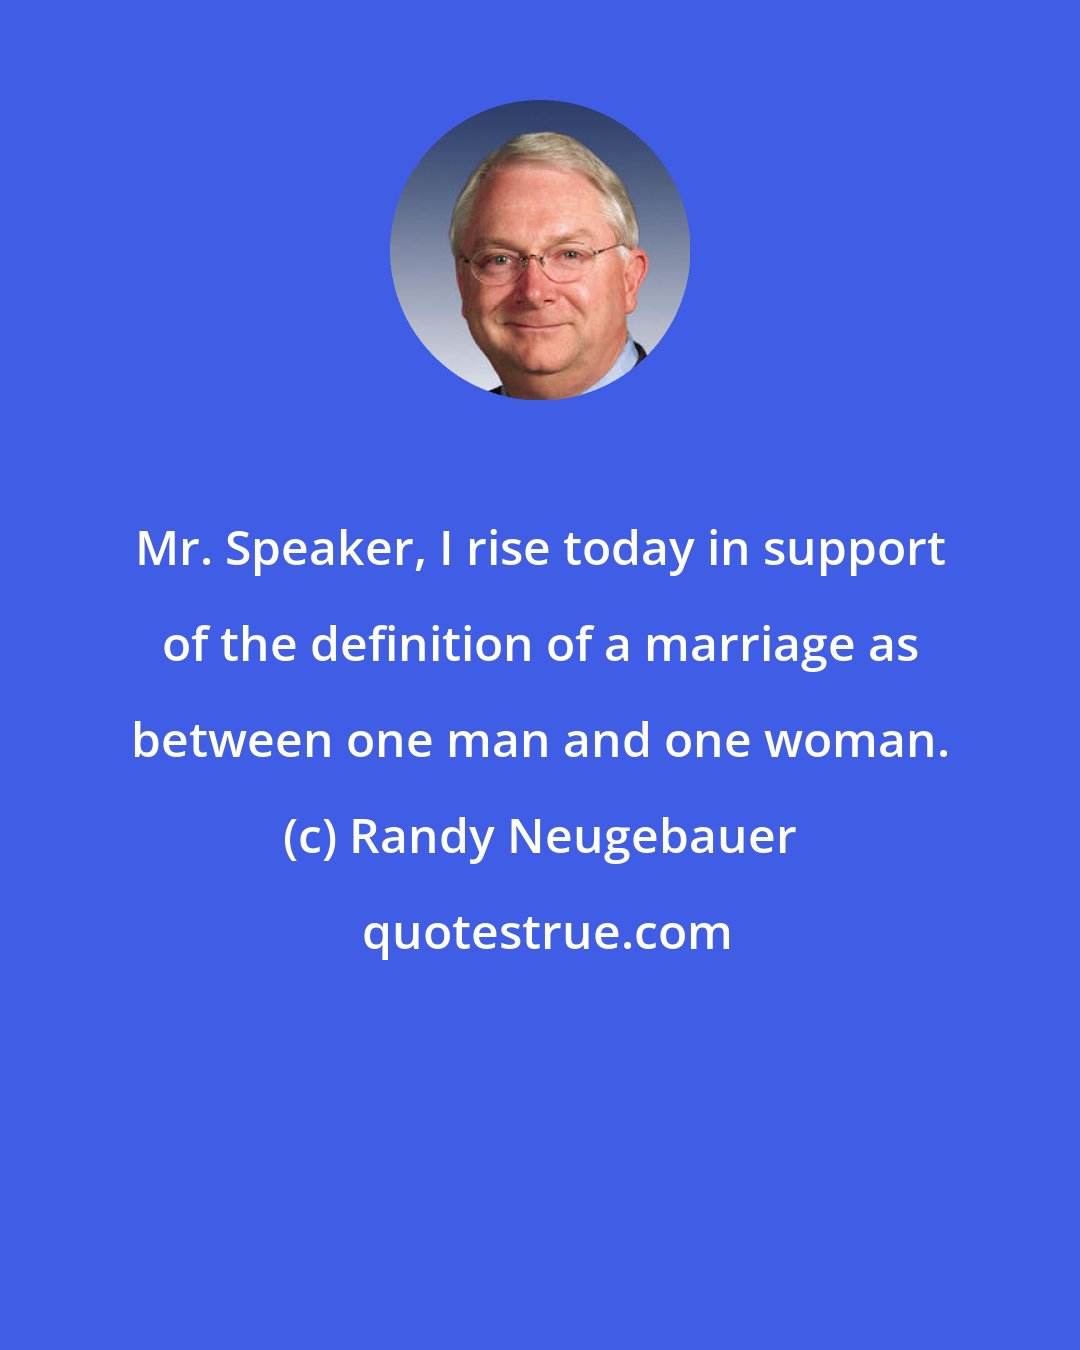 Randy Neugebauer: Mr. Speaker, I rise today in support of the definition of a marriage as between one man and one woman.